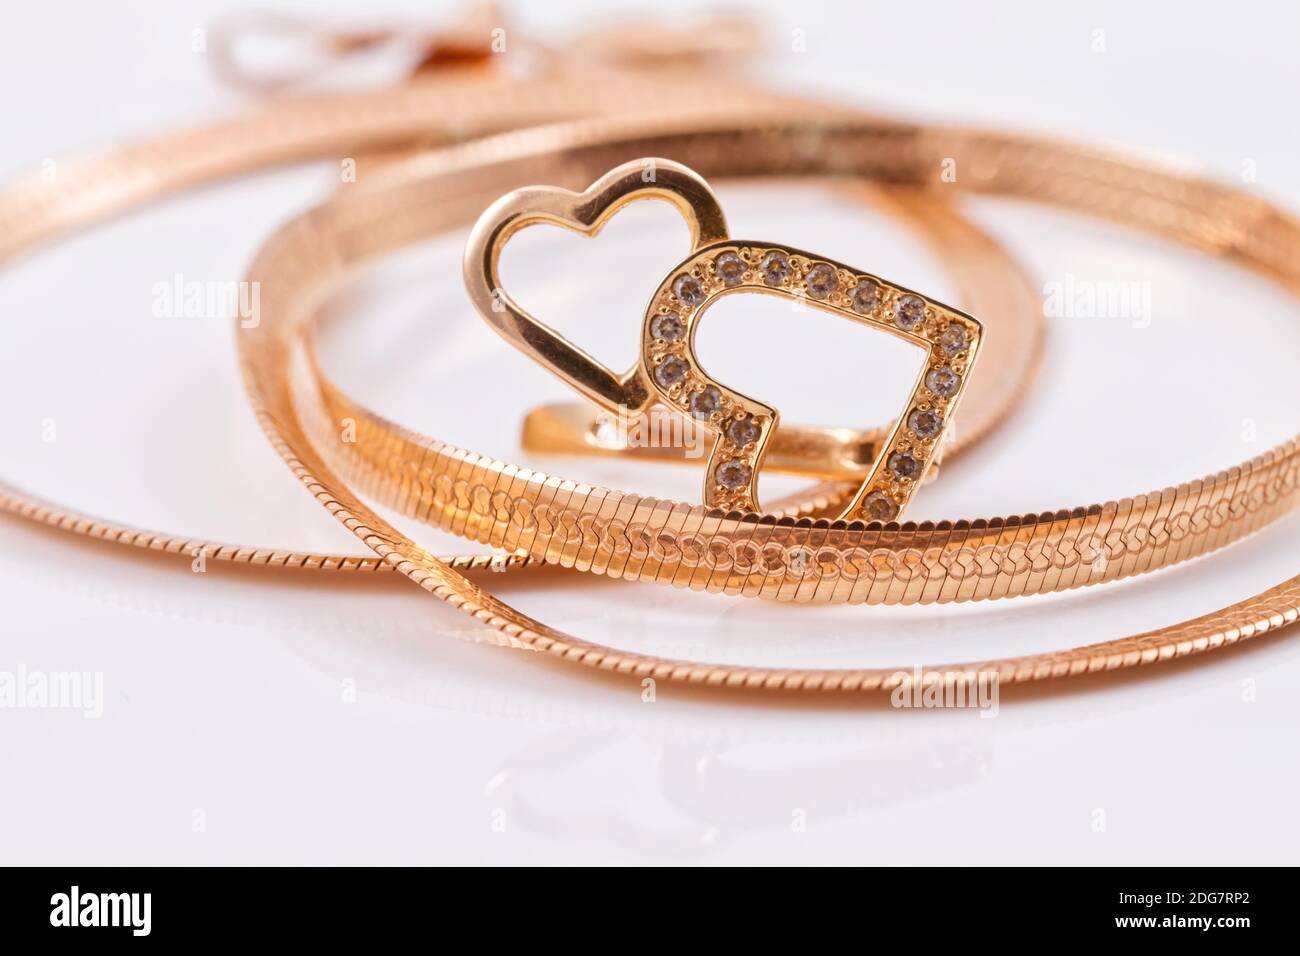 Gold earrings in the shape of a heart and a gold chain Stock Photo